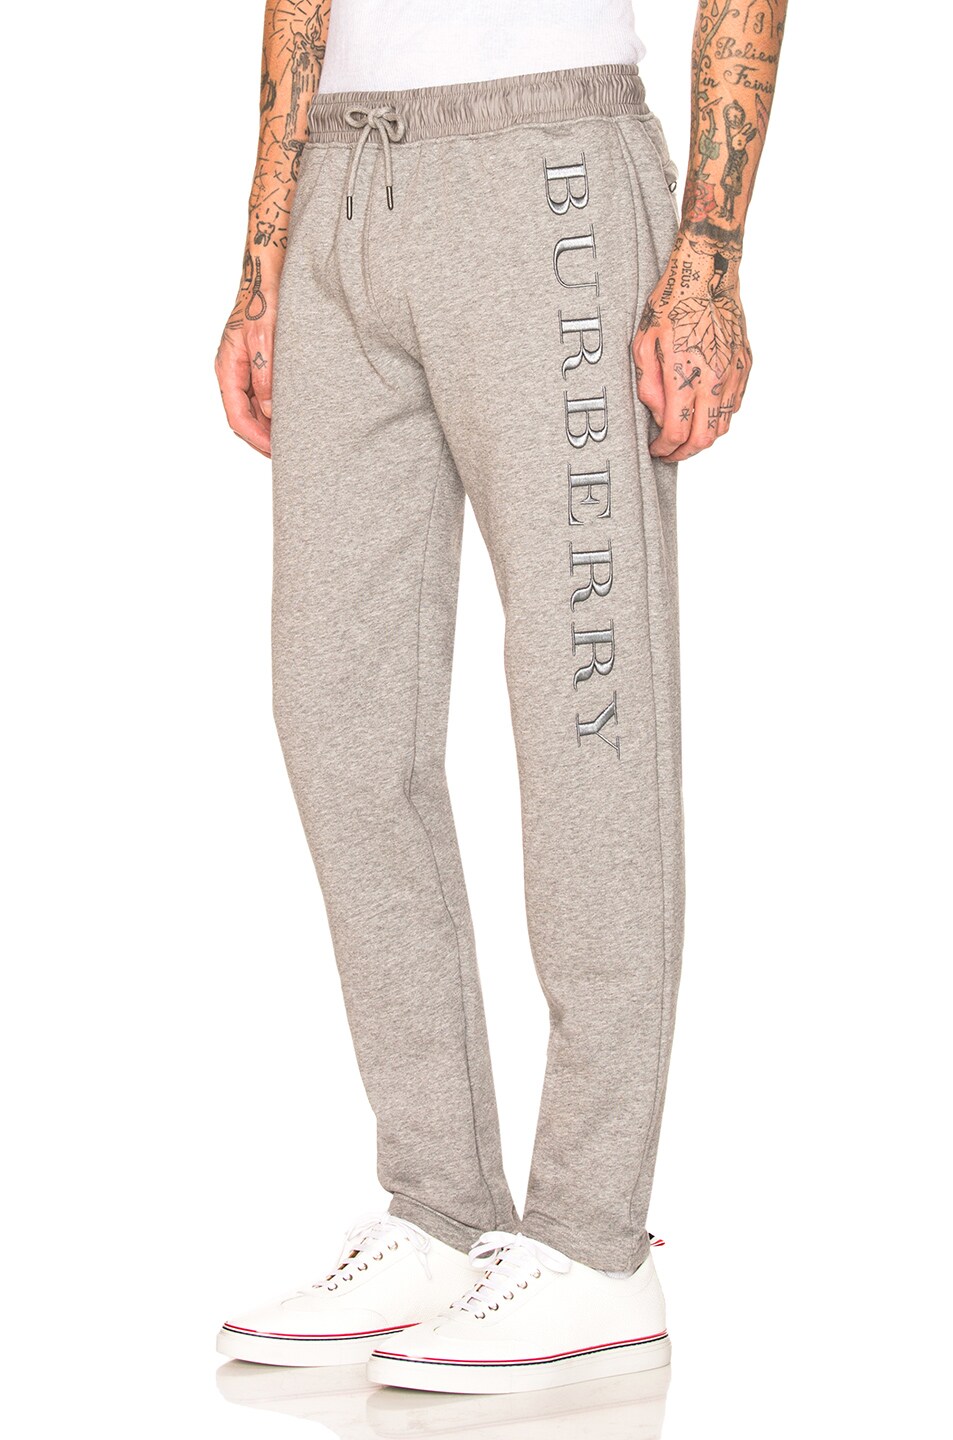 Image 1 of Burberry Nickford Embroidered Sweatpants in Pale Grey Melange